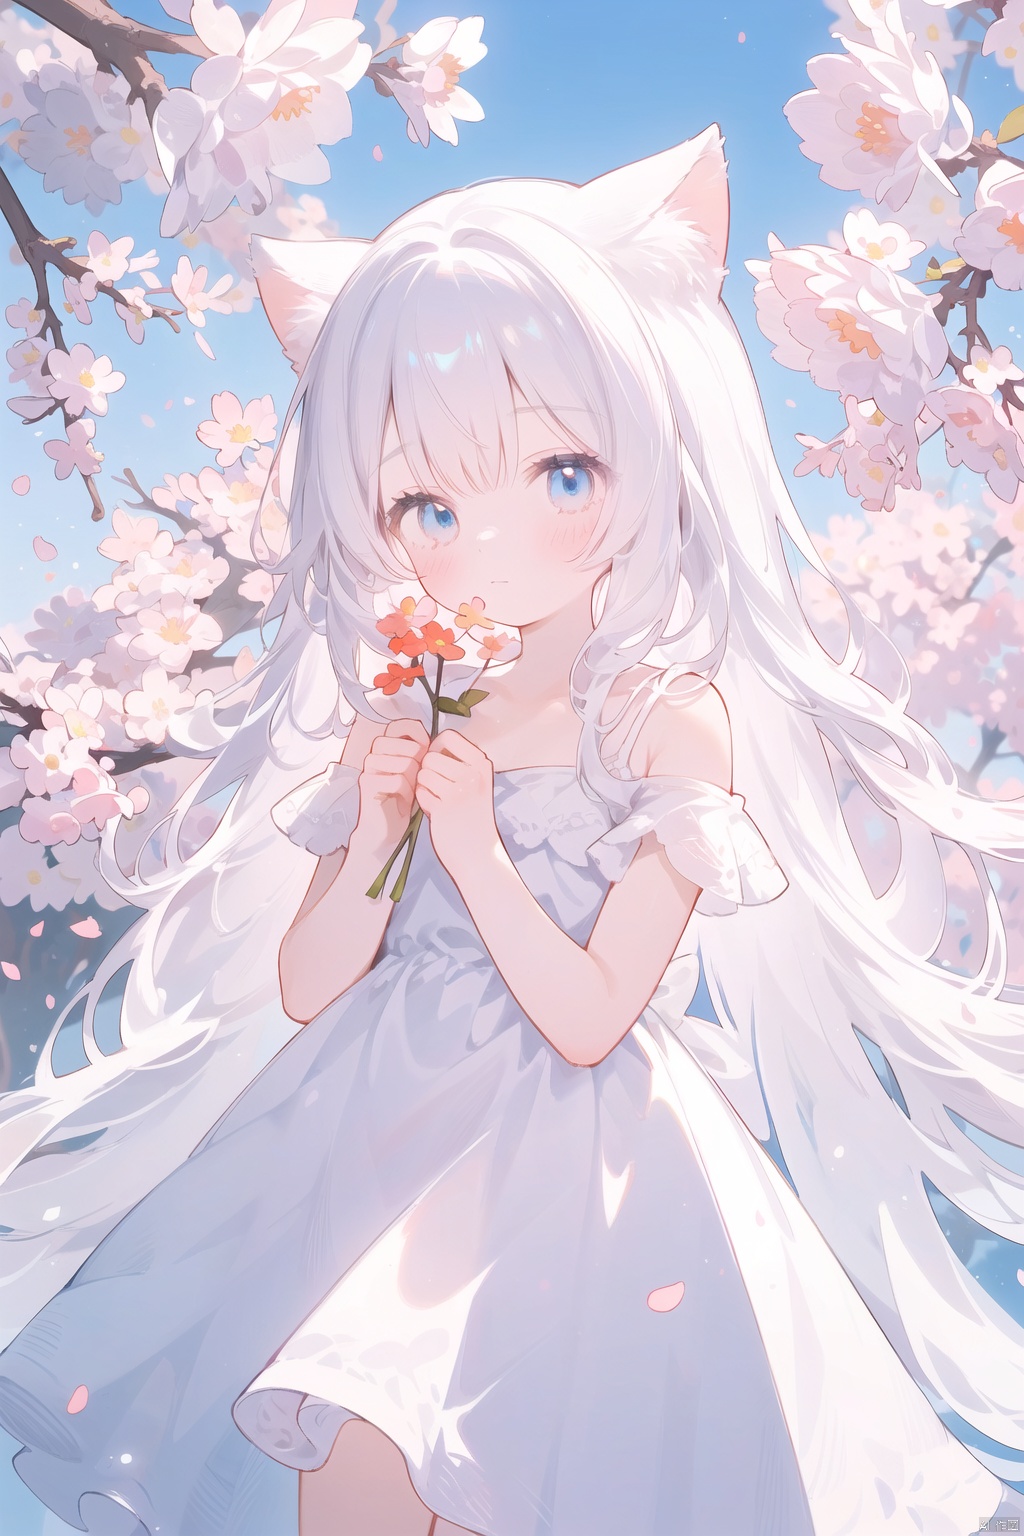 The image features a beautiful anime girl dressed in a flowing white and red dress, standing amidst a flurry of red cherry blossoms. The contrast between her white dress and the red flowers creates a striking visual effect. The lighting in the image is well-balanced, casting a warm glow on the girl and the surrounding flowers. The colors are vibrant and vivid, with the red cherry blossoms standing out against the white sky. The overall style of the image is dreamy and romantic, perfect for a piece of anime artwork. The quality of the image is excellent, with clear details and sharp focus. The girl's dress and the flowers are well-defined, and the background is evenly lit, without any harsh shadows or glare. From a technical standpoint, the image is well-composed, with the girl standing in the center of the frame, surrounded by the blossoms. The use of negative space in the background helps to draw the viewer's attention to the girl and the flowers. The cherry blossoms, often associated with transience and beauty, further reinforce this theme. The girl, lost in her thoughts, seems to be contemplating the fleeting nature of beauty and the passage of time. Overall, this is an impressive image that showcases the photographer's skill in capturing the essence of a scene, as well as their ability to create a compelling narrative through their art.catgirl,loli,catgirl,white hair,blue eyes,
